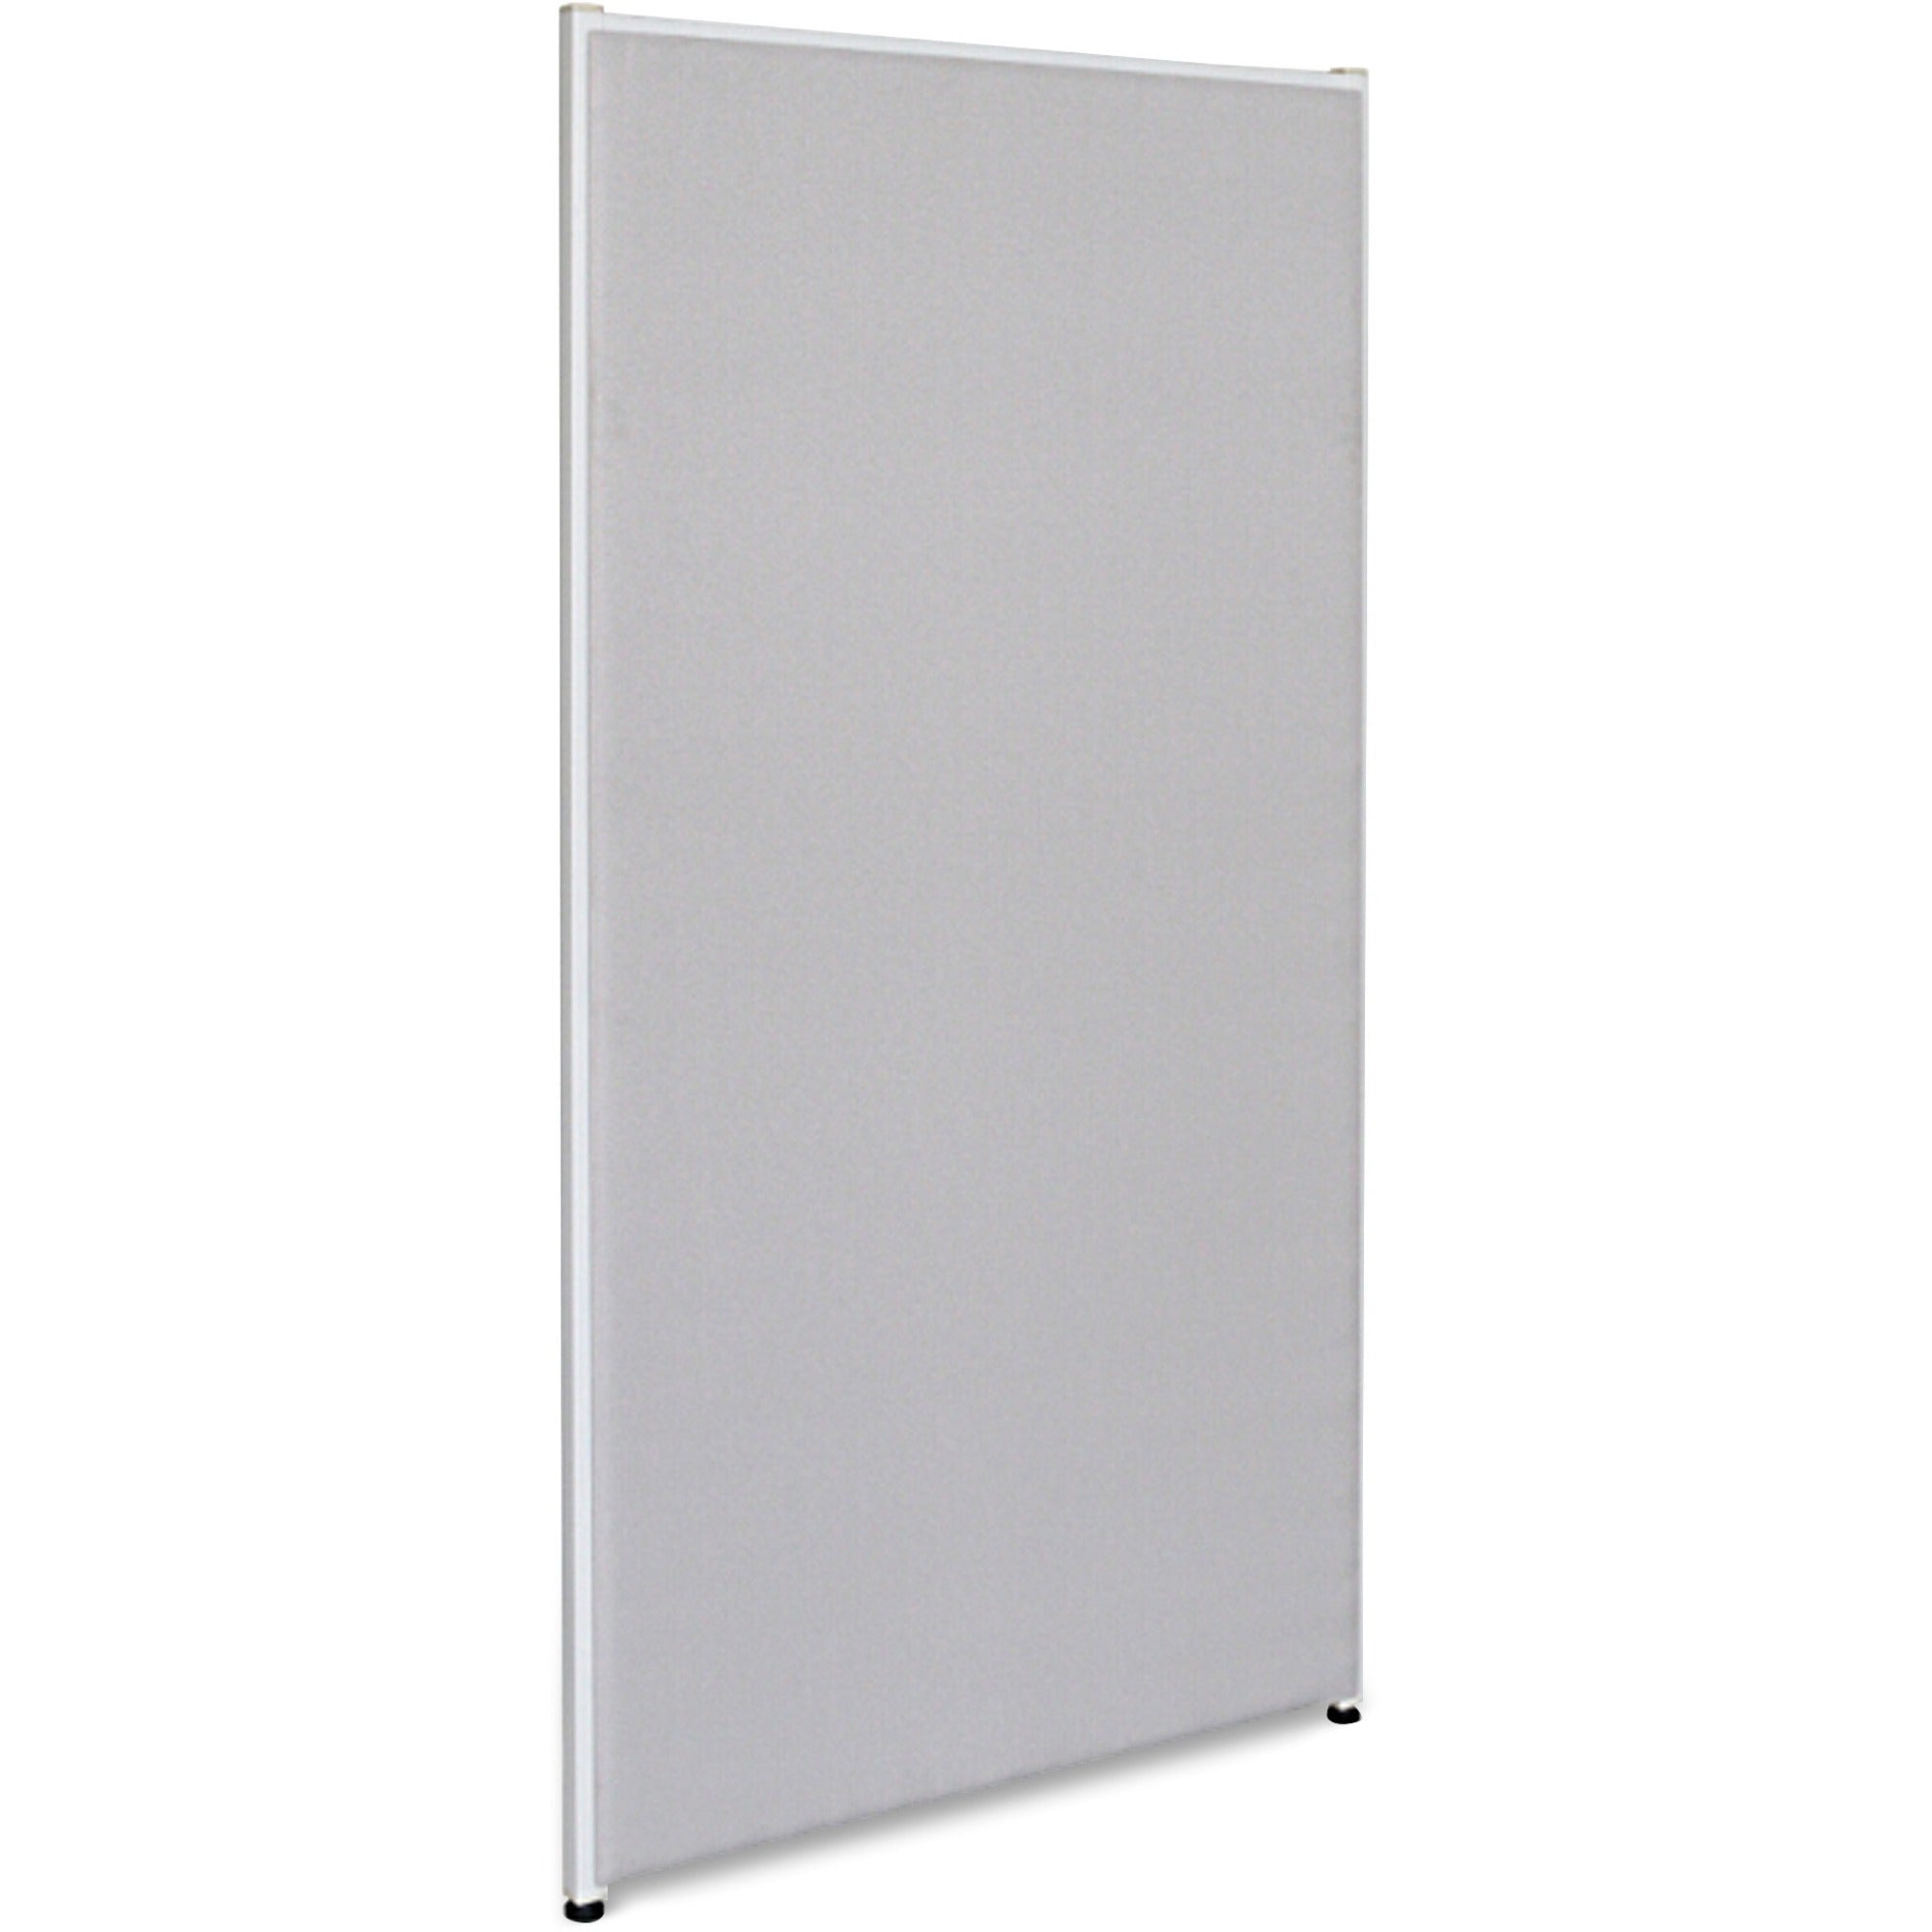 Lorell Panel System Partition Fabric Panel - 30.5" Width x 60" Height - Steel Frame - Gray - 1 Each - 